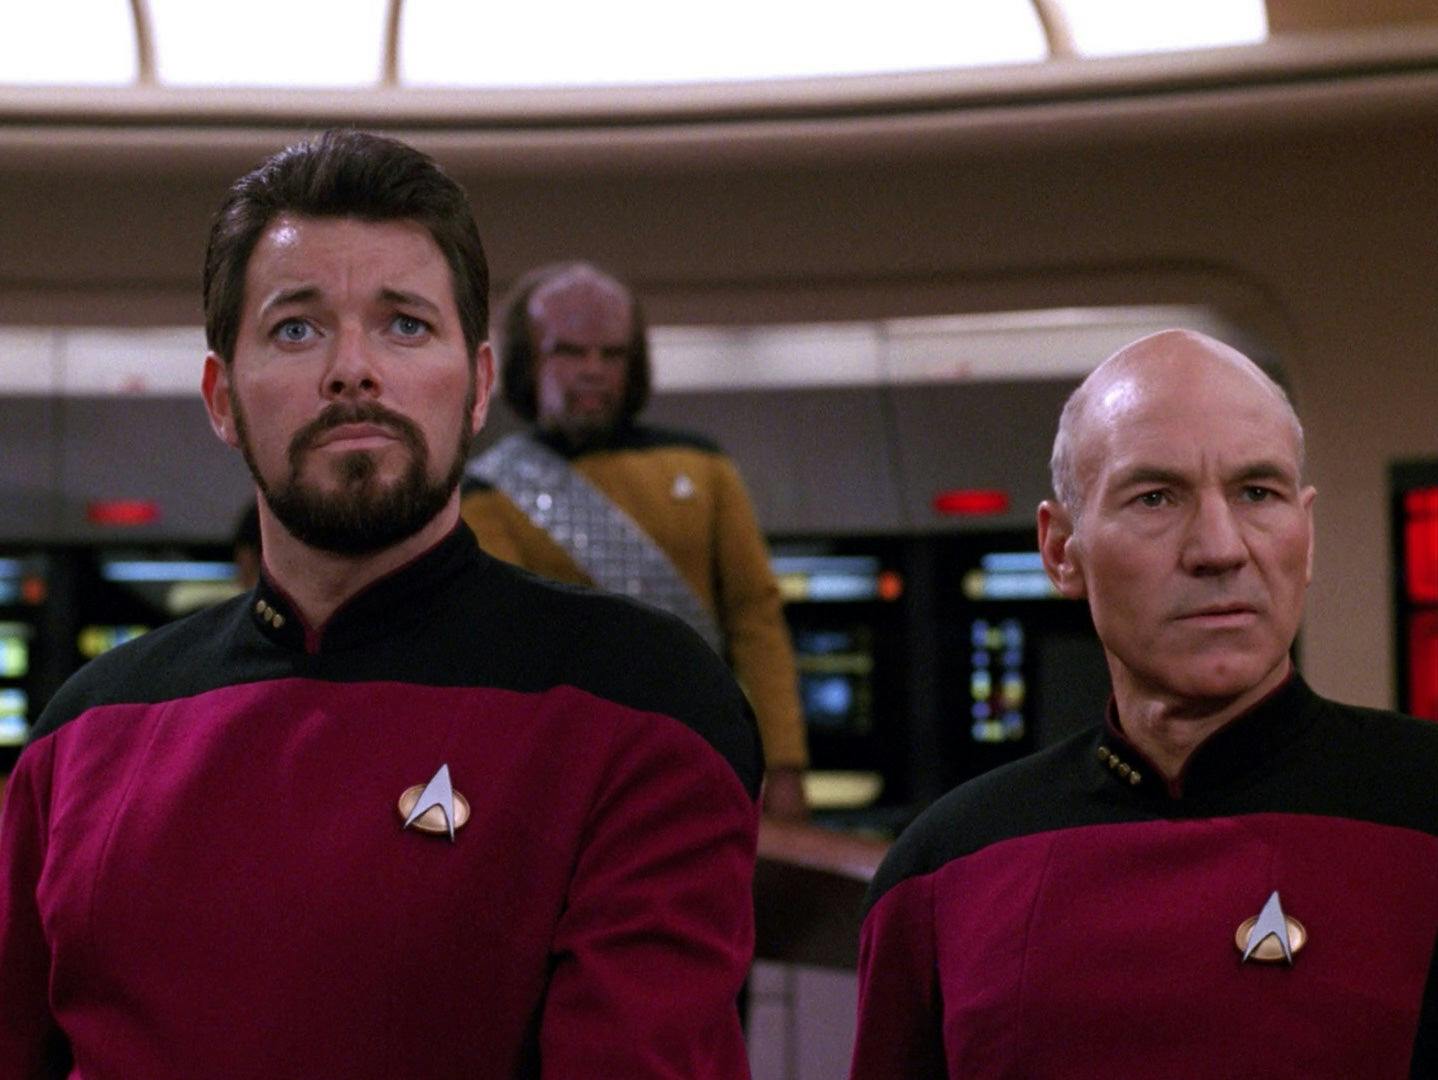 Captain Picard and Will Riker stare at the Enterprise-D's viewscreen.